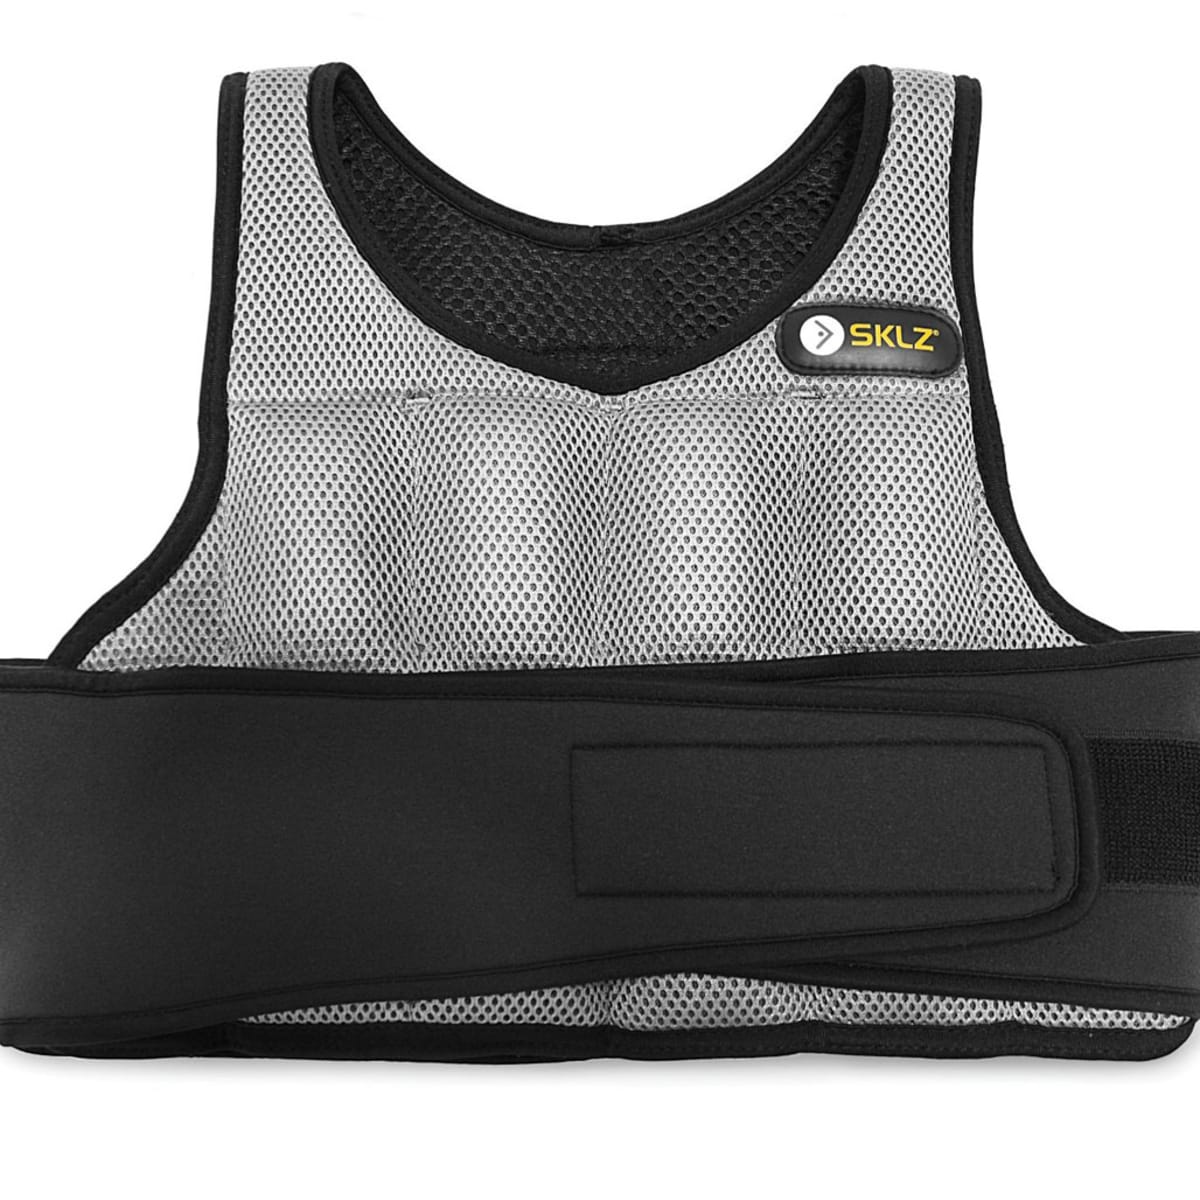 Two Weighted Vest Workouts You Should Try